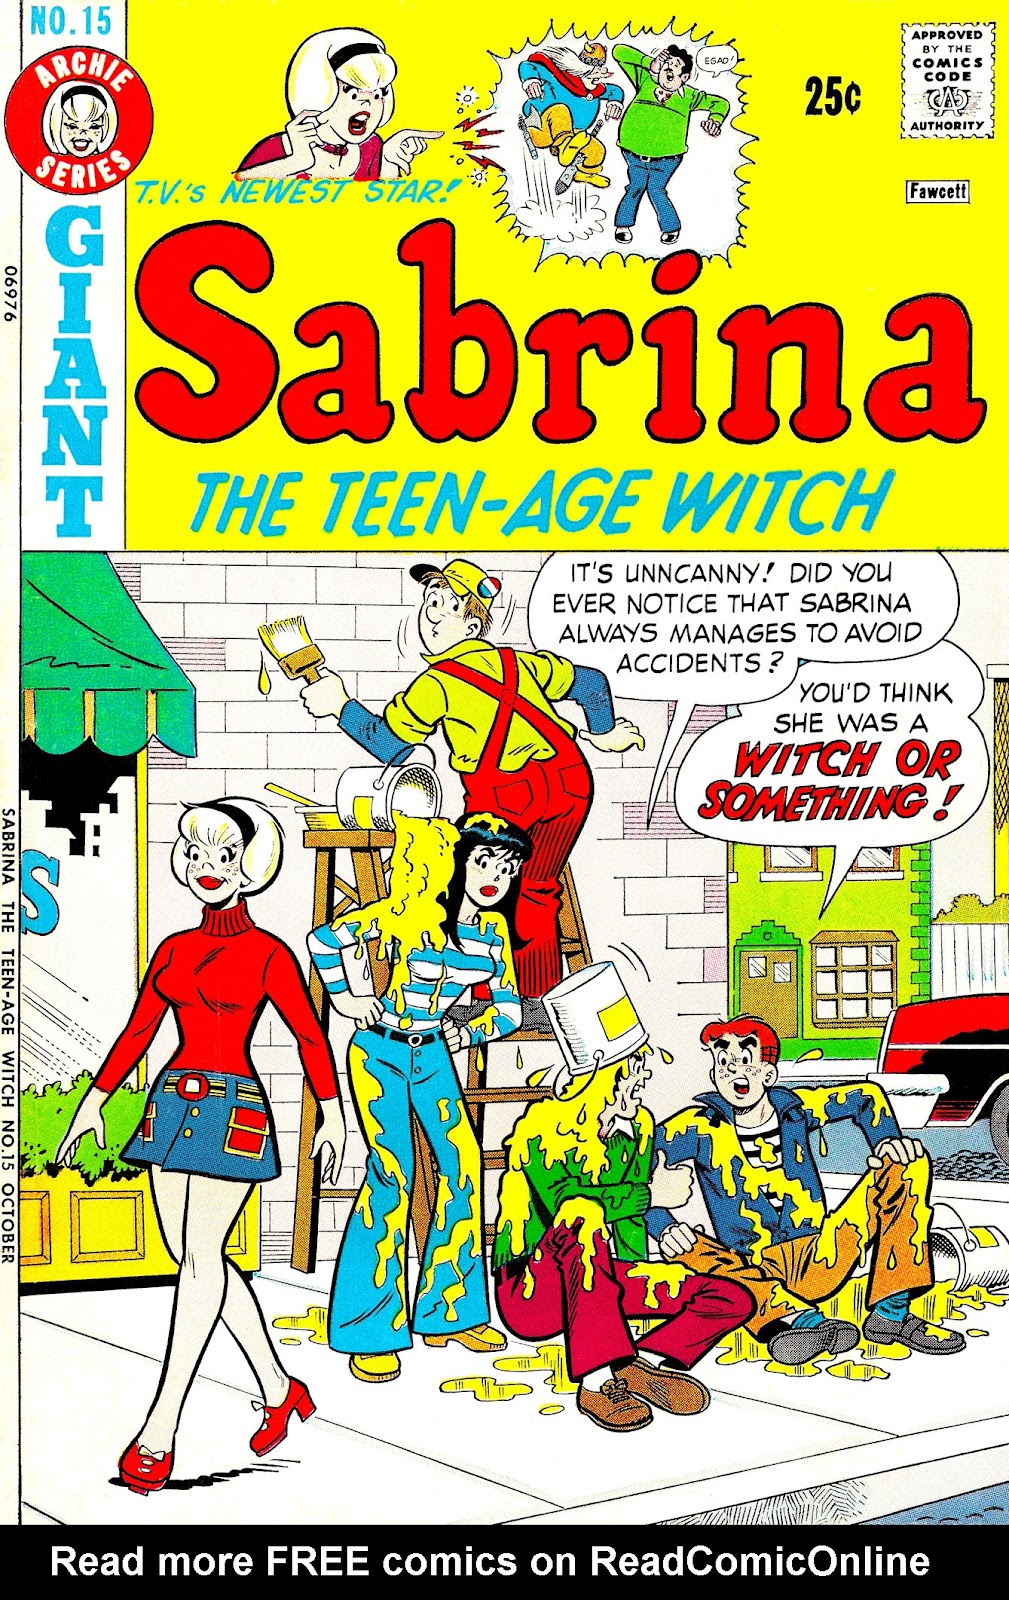 Sabrina The Teenage Witch (1971) Issue #15 #15 - English 1